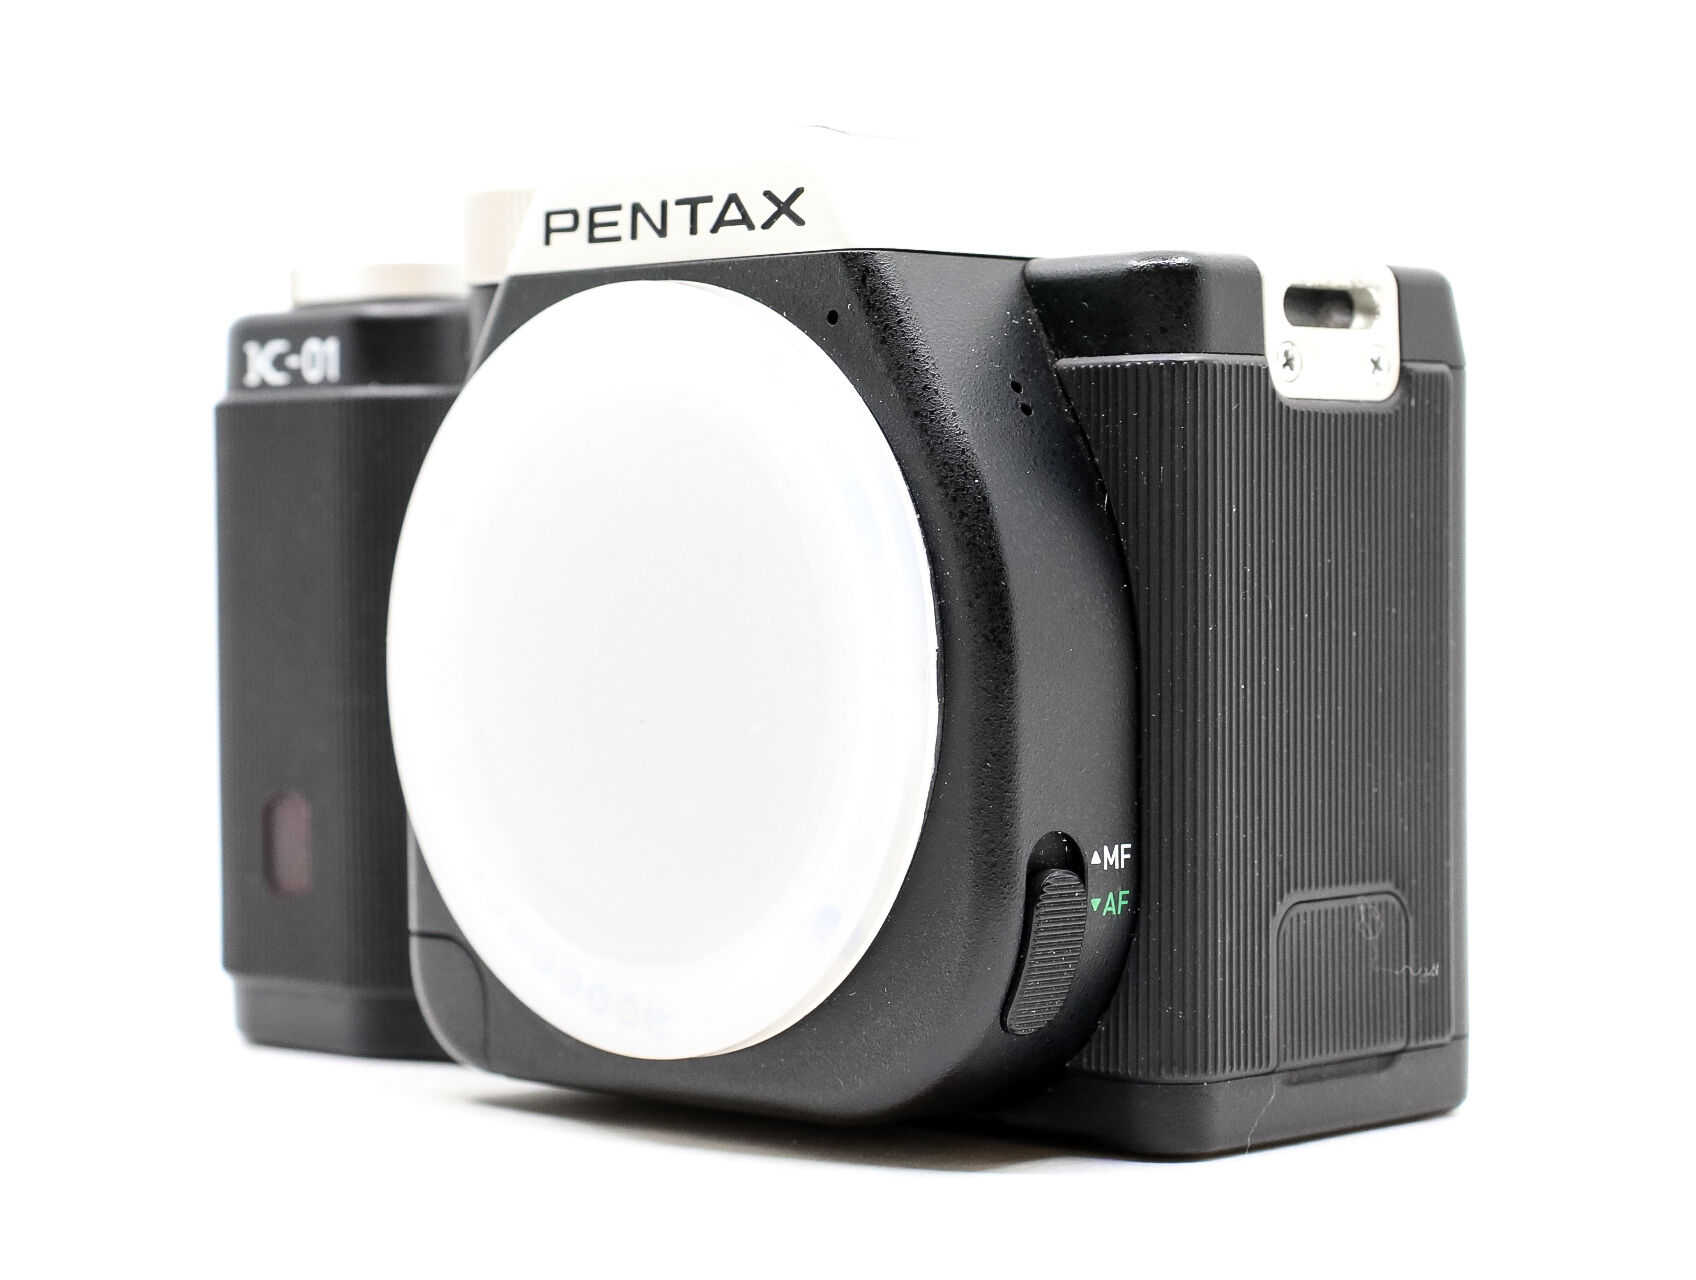 Pentax K-01 (Condition: Like New)